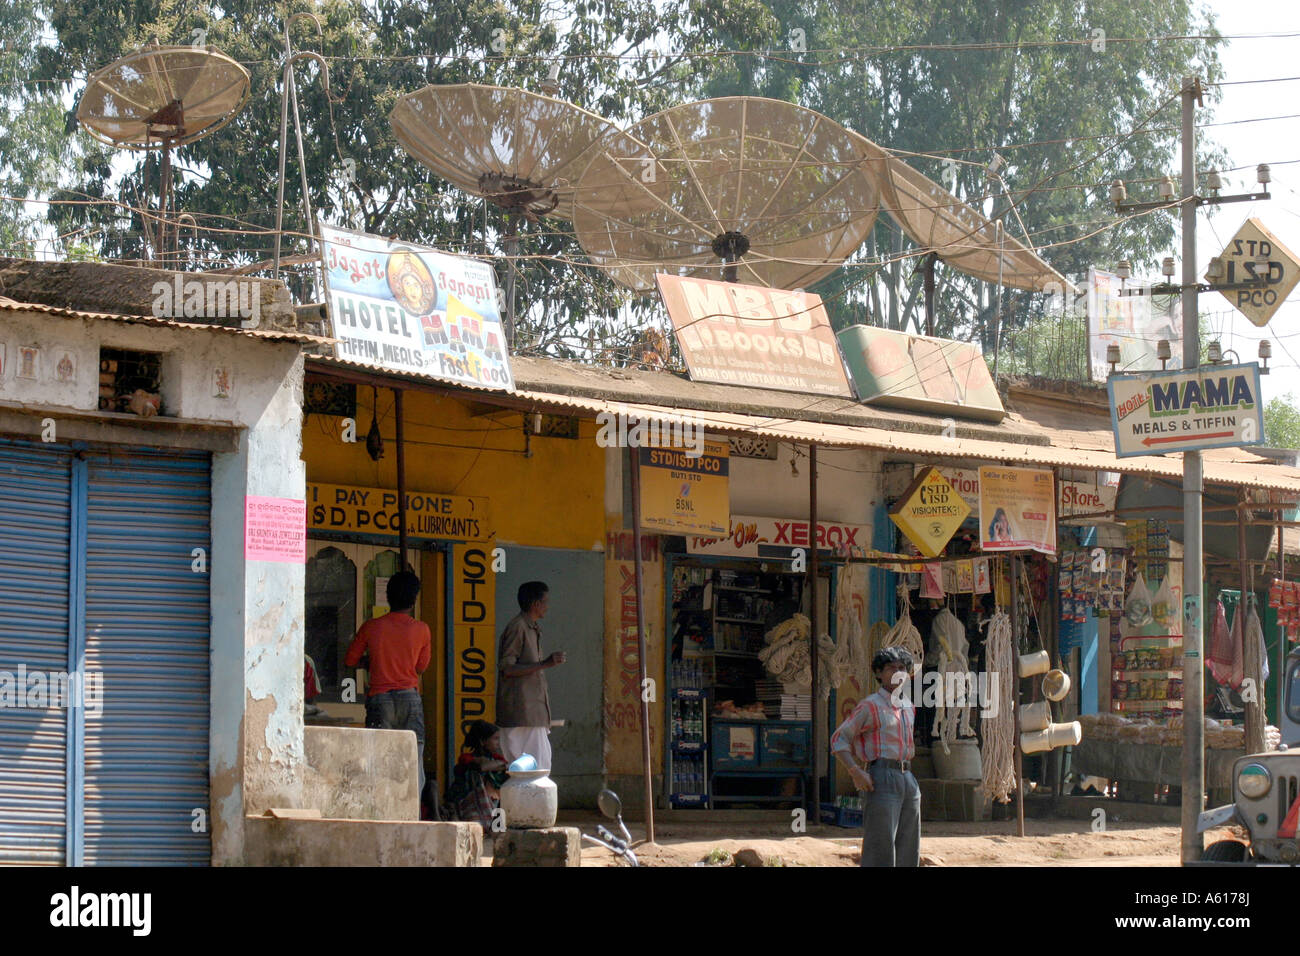 Internet and  TV ariels on the  roofs of  shops in a remote  tribal  area village in Orissa India Stock Photo